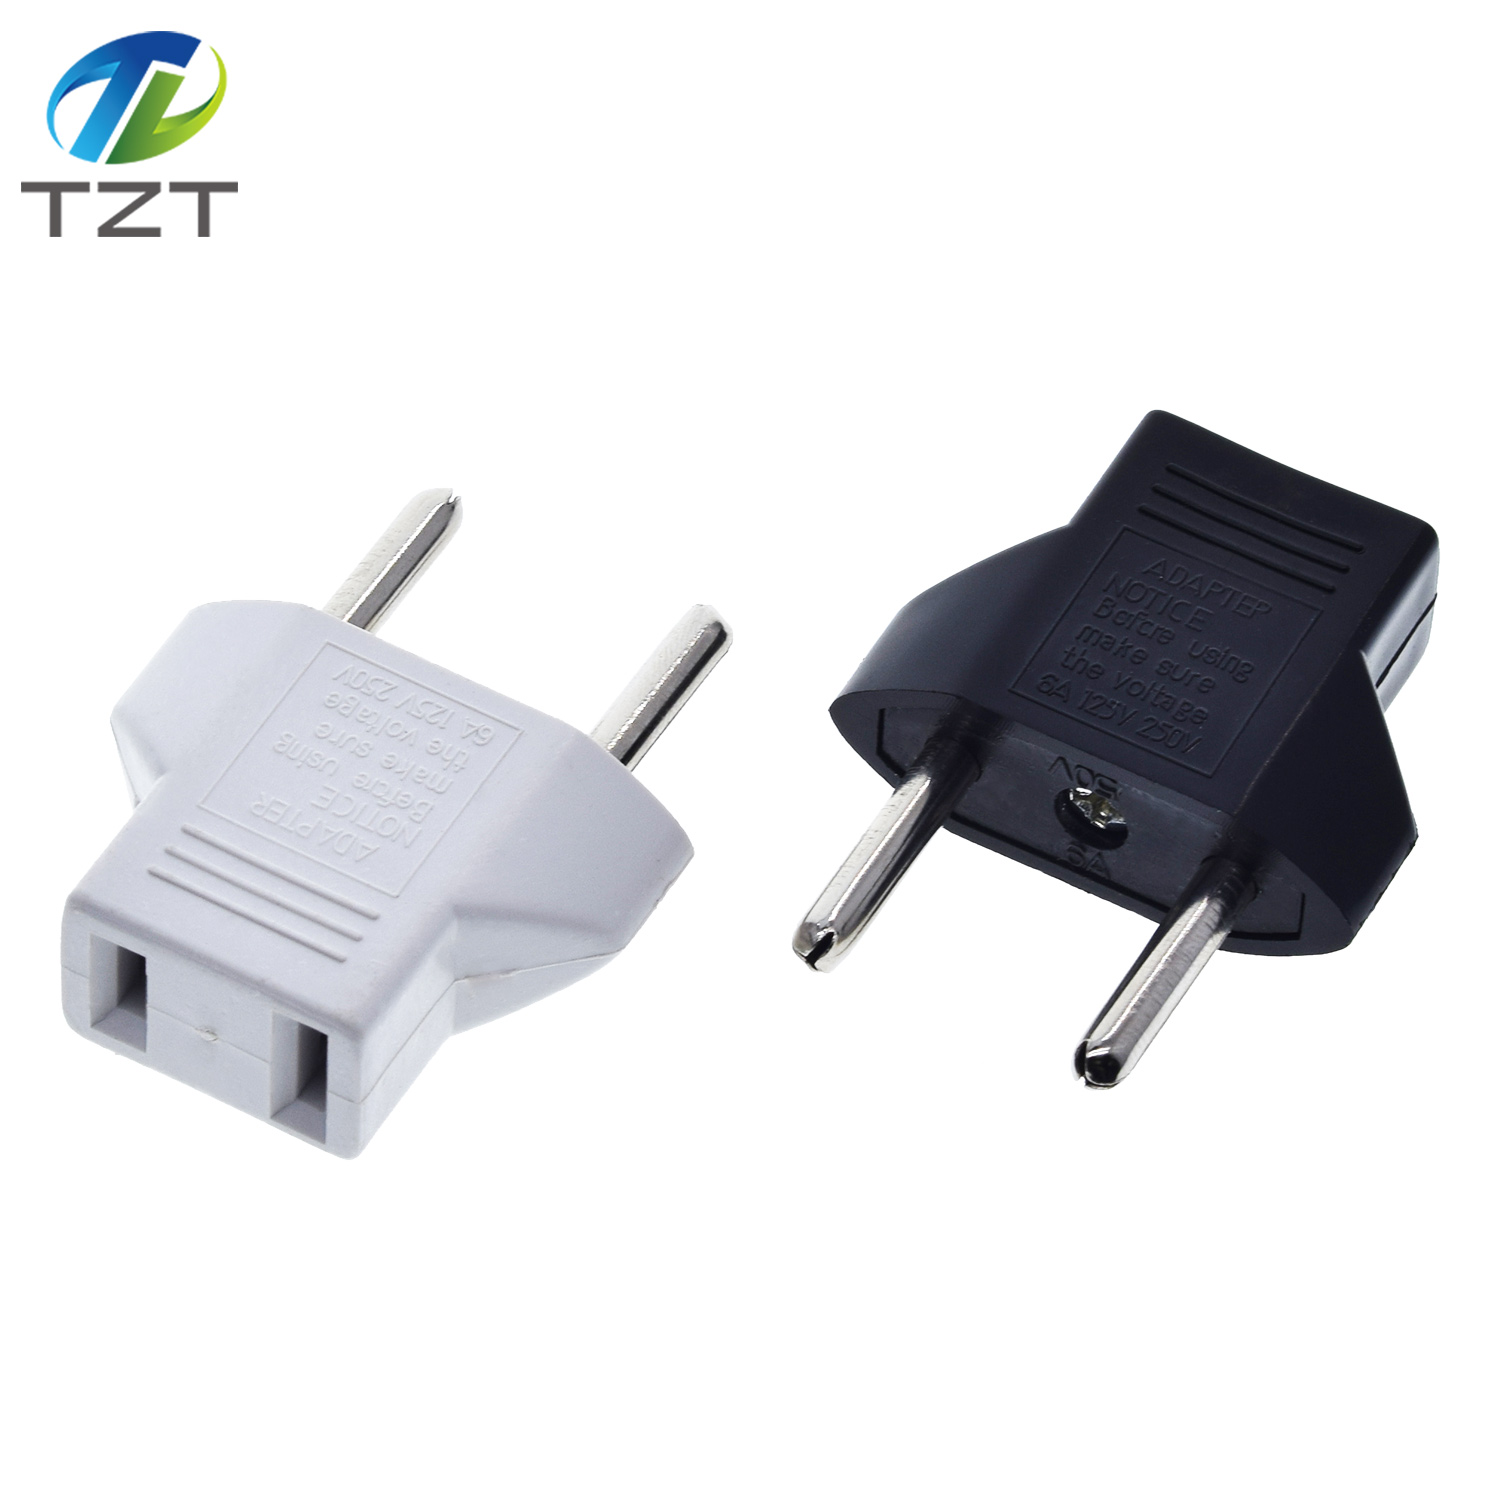 TZT Universal US To EU Plug USA To Euro Europe Travel Wall AC Power Charger Outlet Adapter Converter 2 Round Socket Input Pin